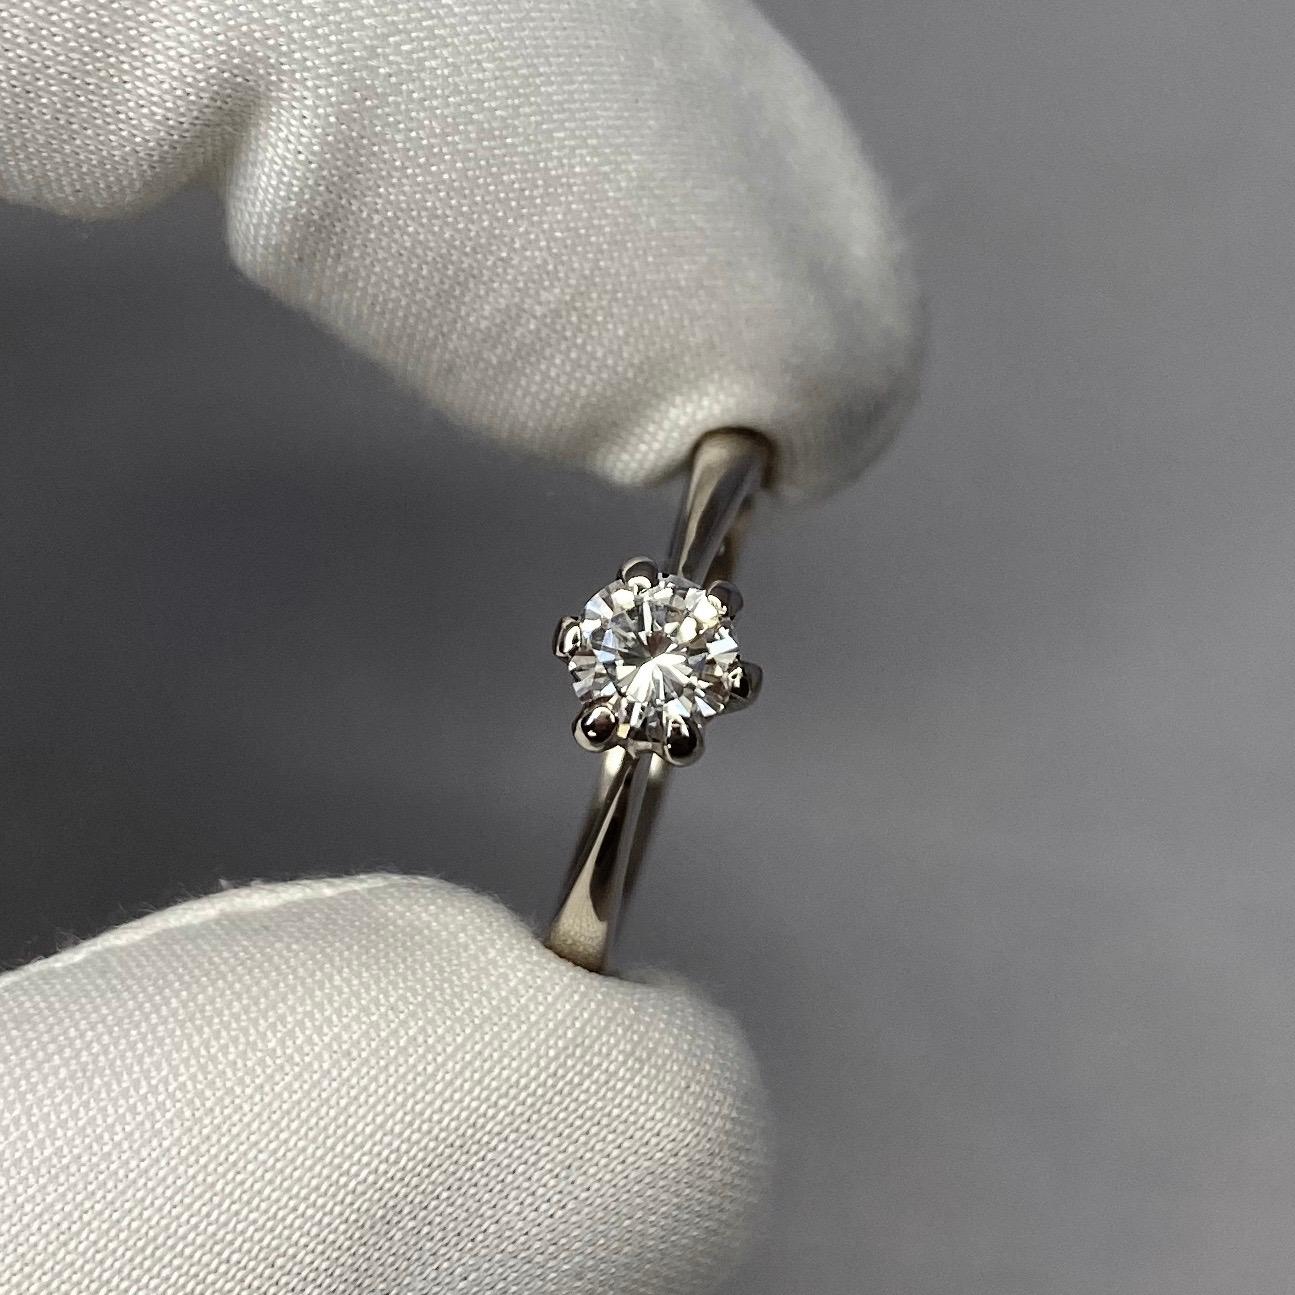 Solitaire 18 Karat White Gold Diamond Ring

0.48 carat diamond with SI2 clarity and G colour. Also has a very good round brilliant cut to show lots of light return and sparkle. 

Ring size J1/2. The ring is re-sizeable.
Fully hallmarked to guarantee